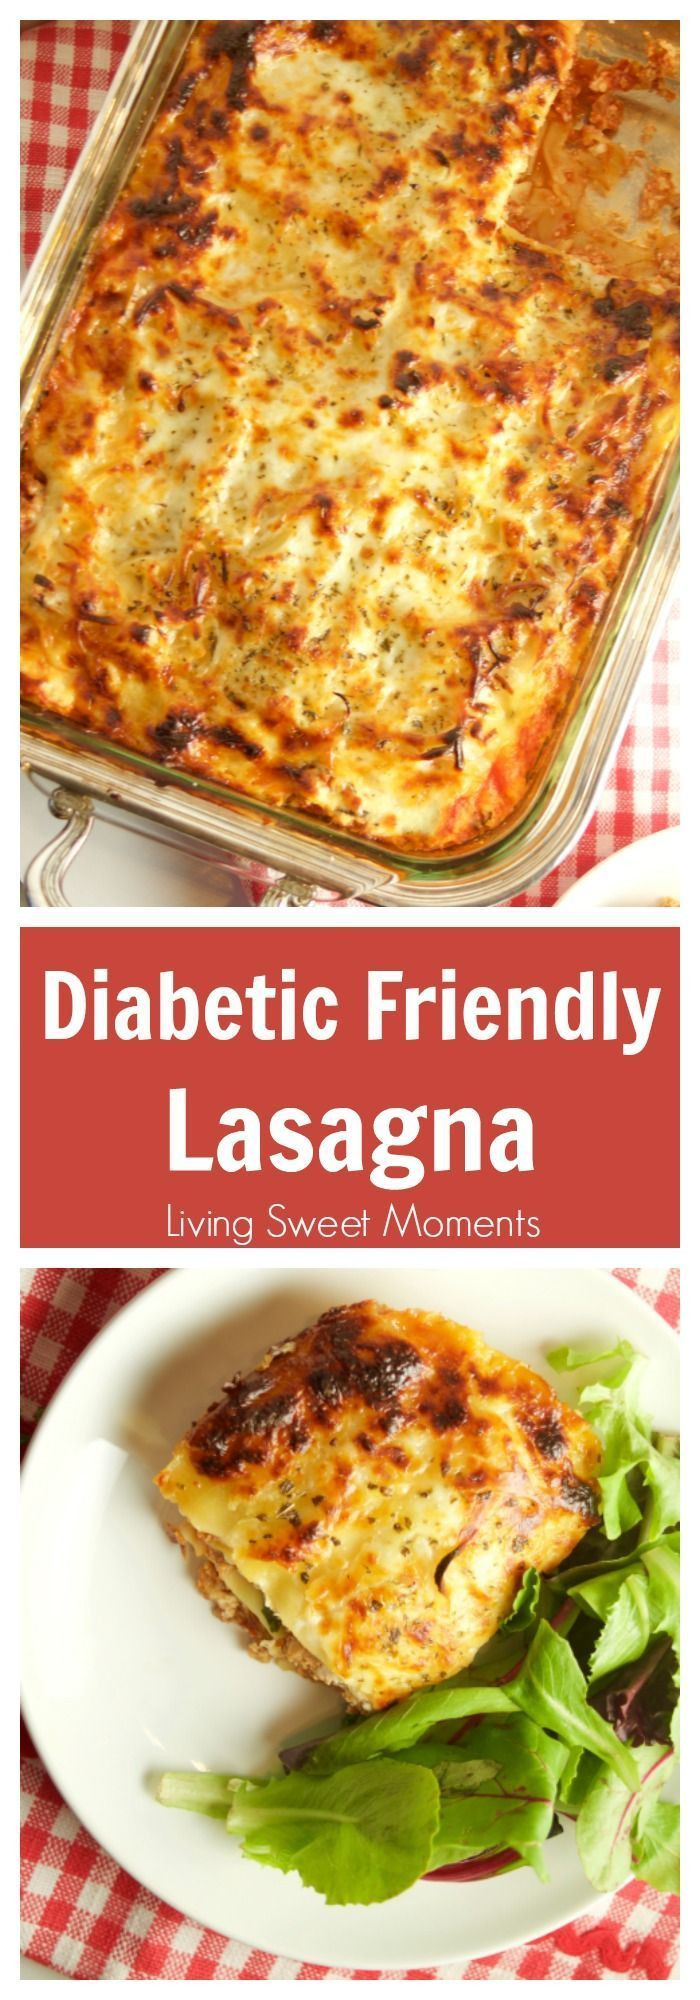 Diabetic Recipe With Ground Beef
 100 Diabetic Dinner Recipes on Pinterest